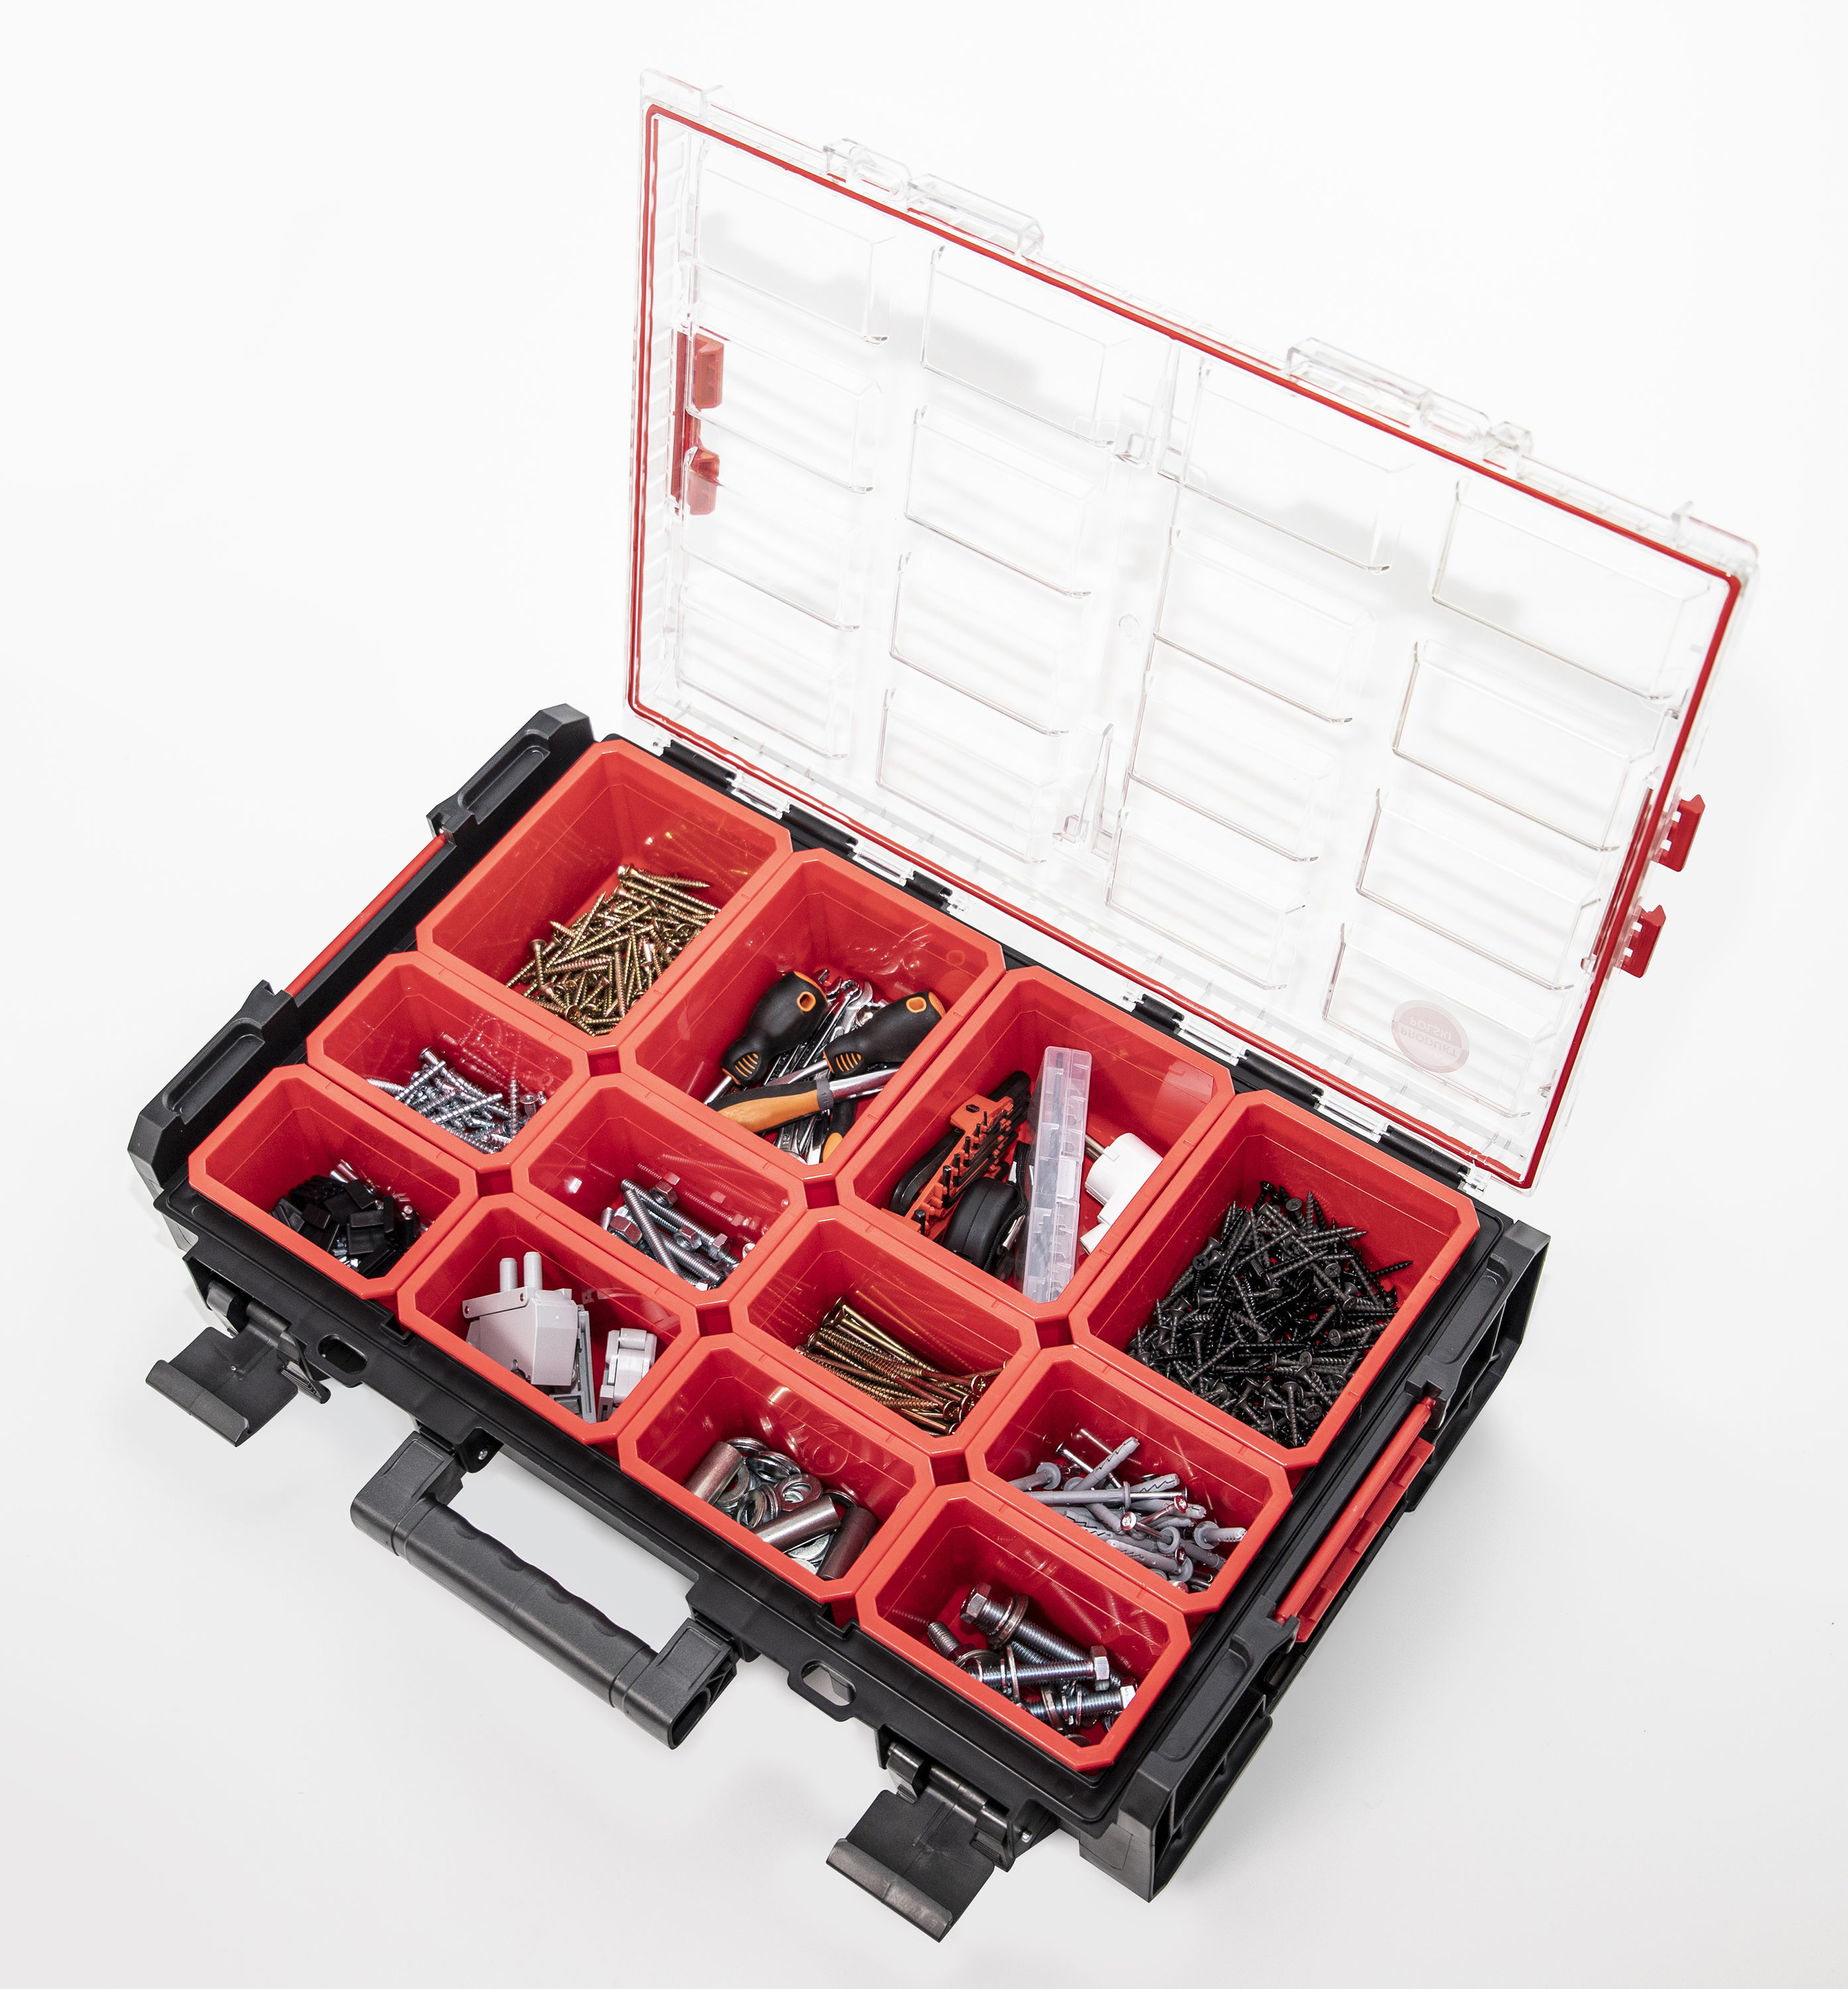 Qbrick System PRO Drawer 2 Toolbox 2.0 Expert - Electrical 4 Less